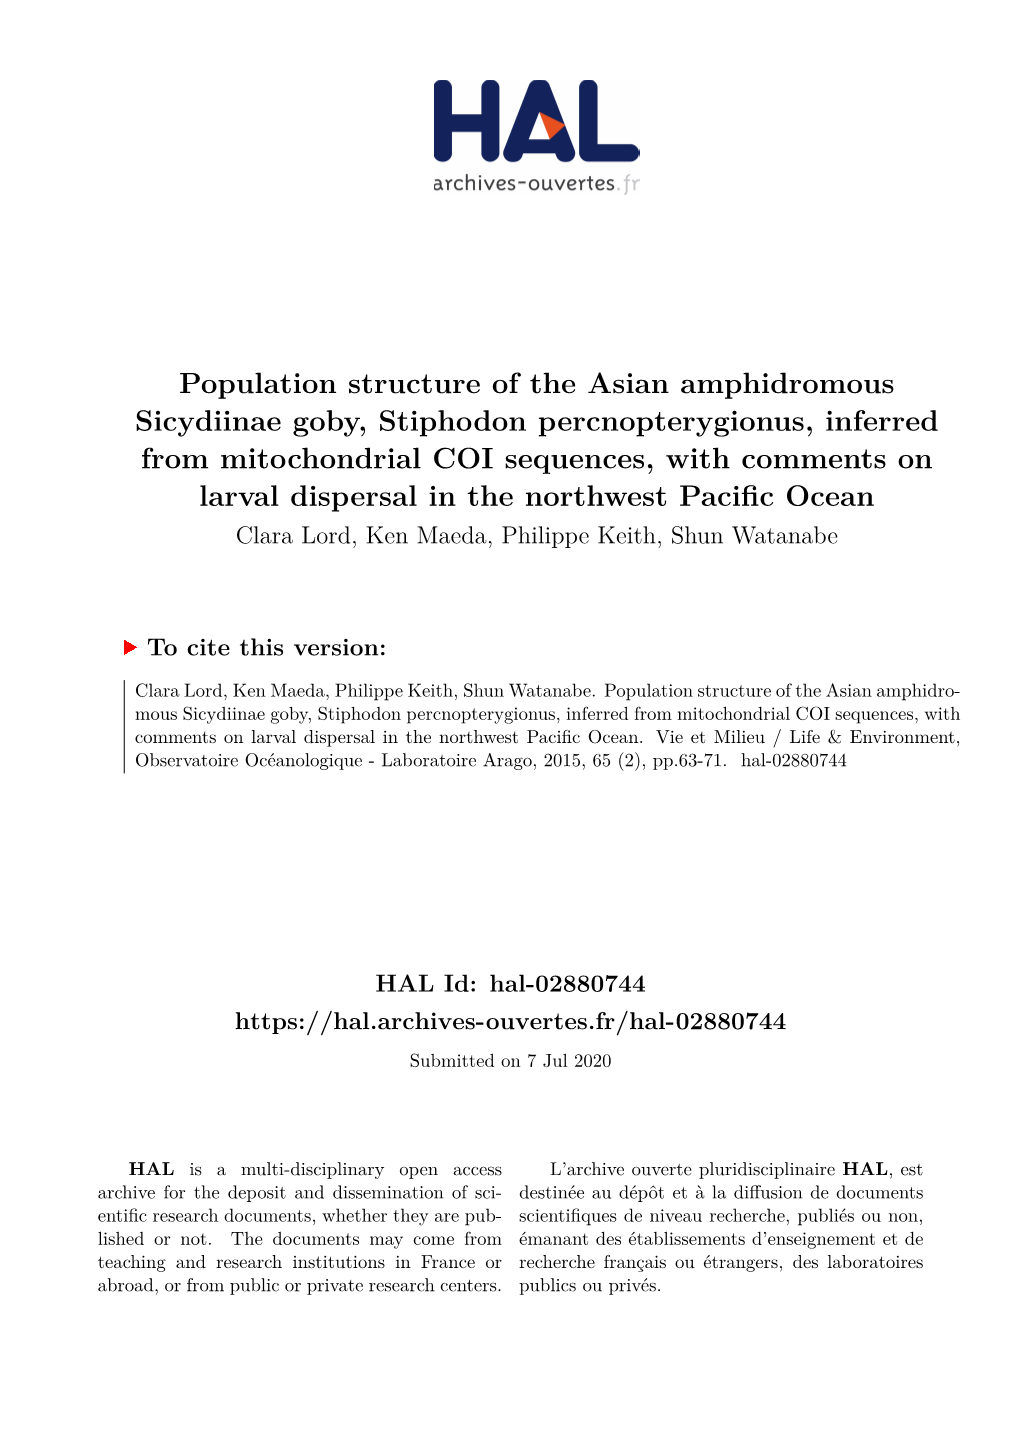 Population Structure of the Asian Amphidromous Sicydiinae Goby, Stiphodon Percnopterygionus, Inferred from Mitochondrial COI